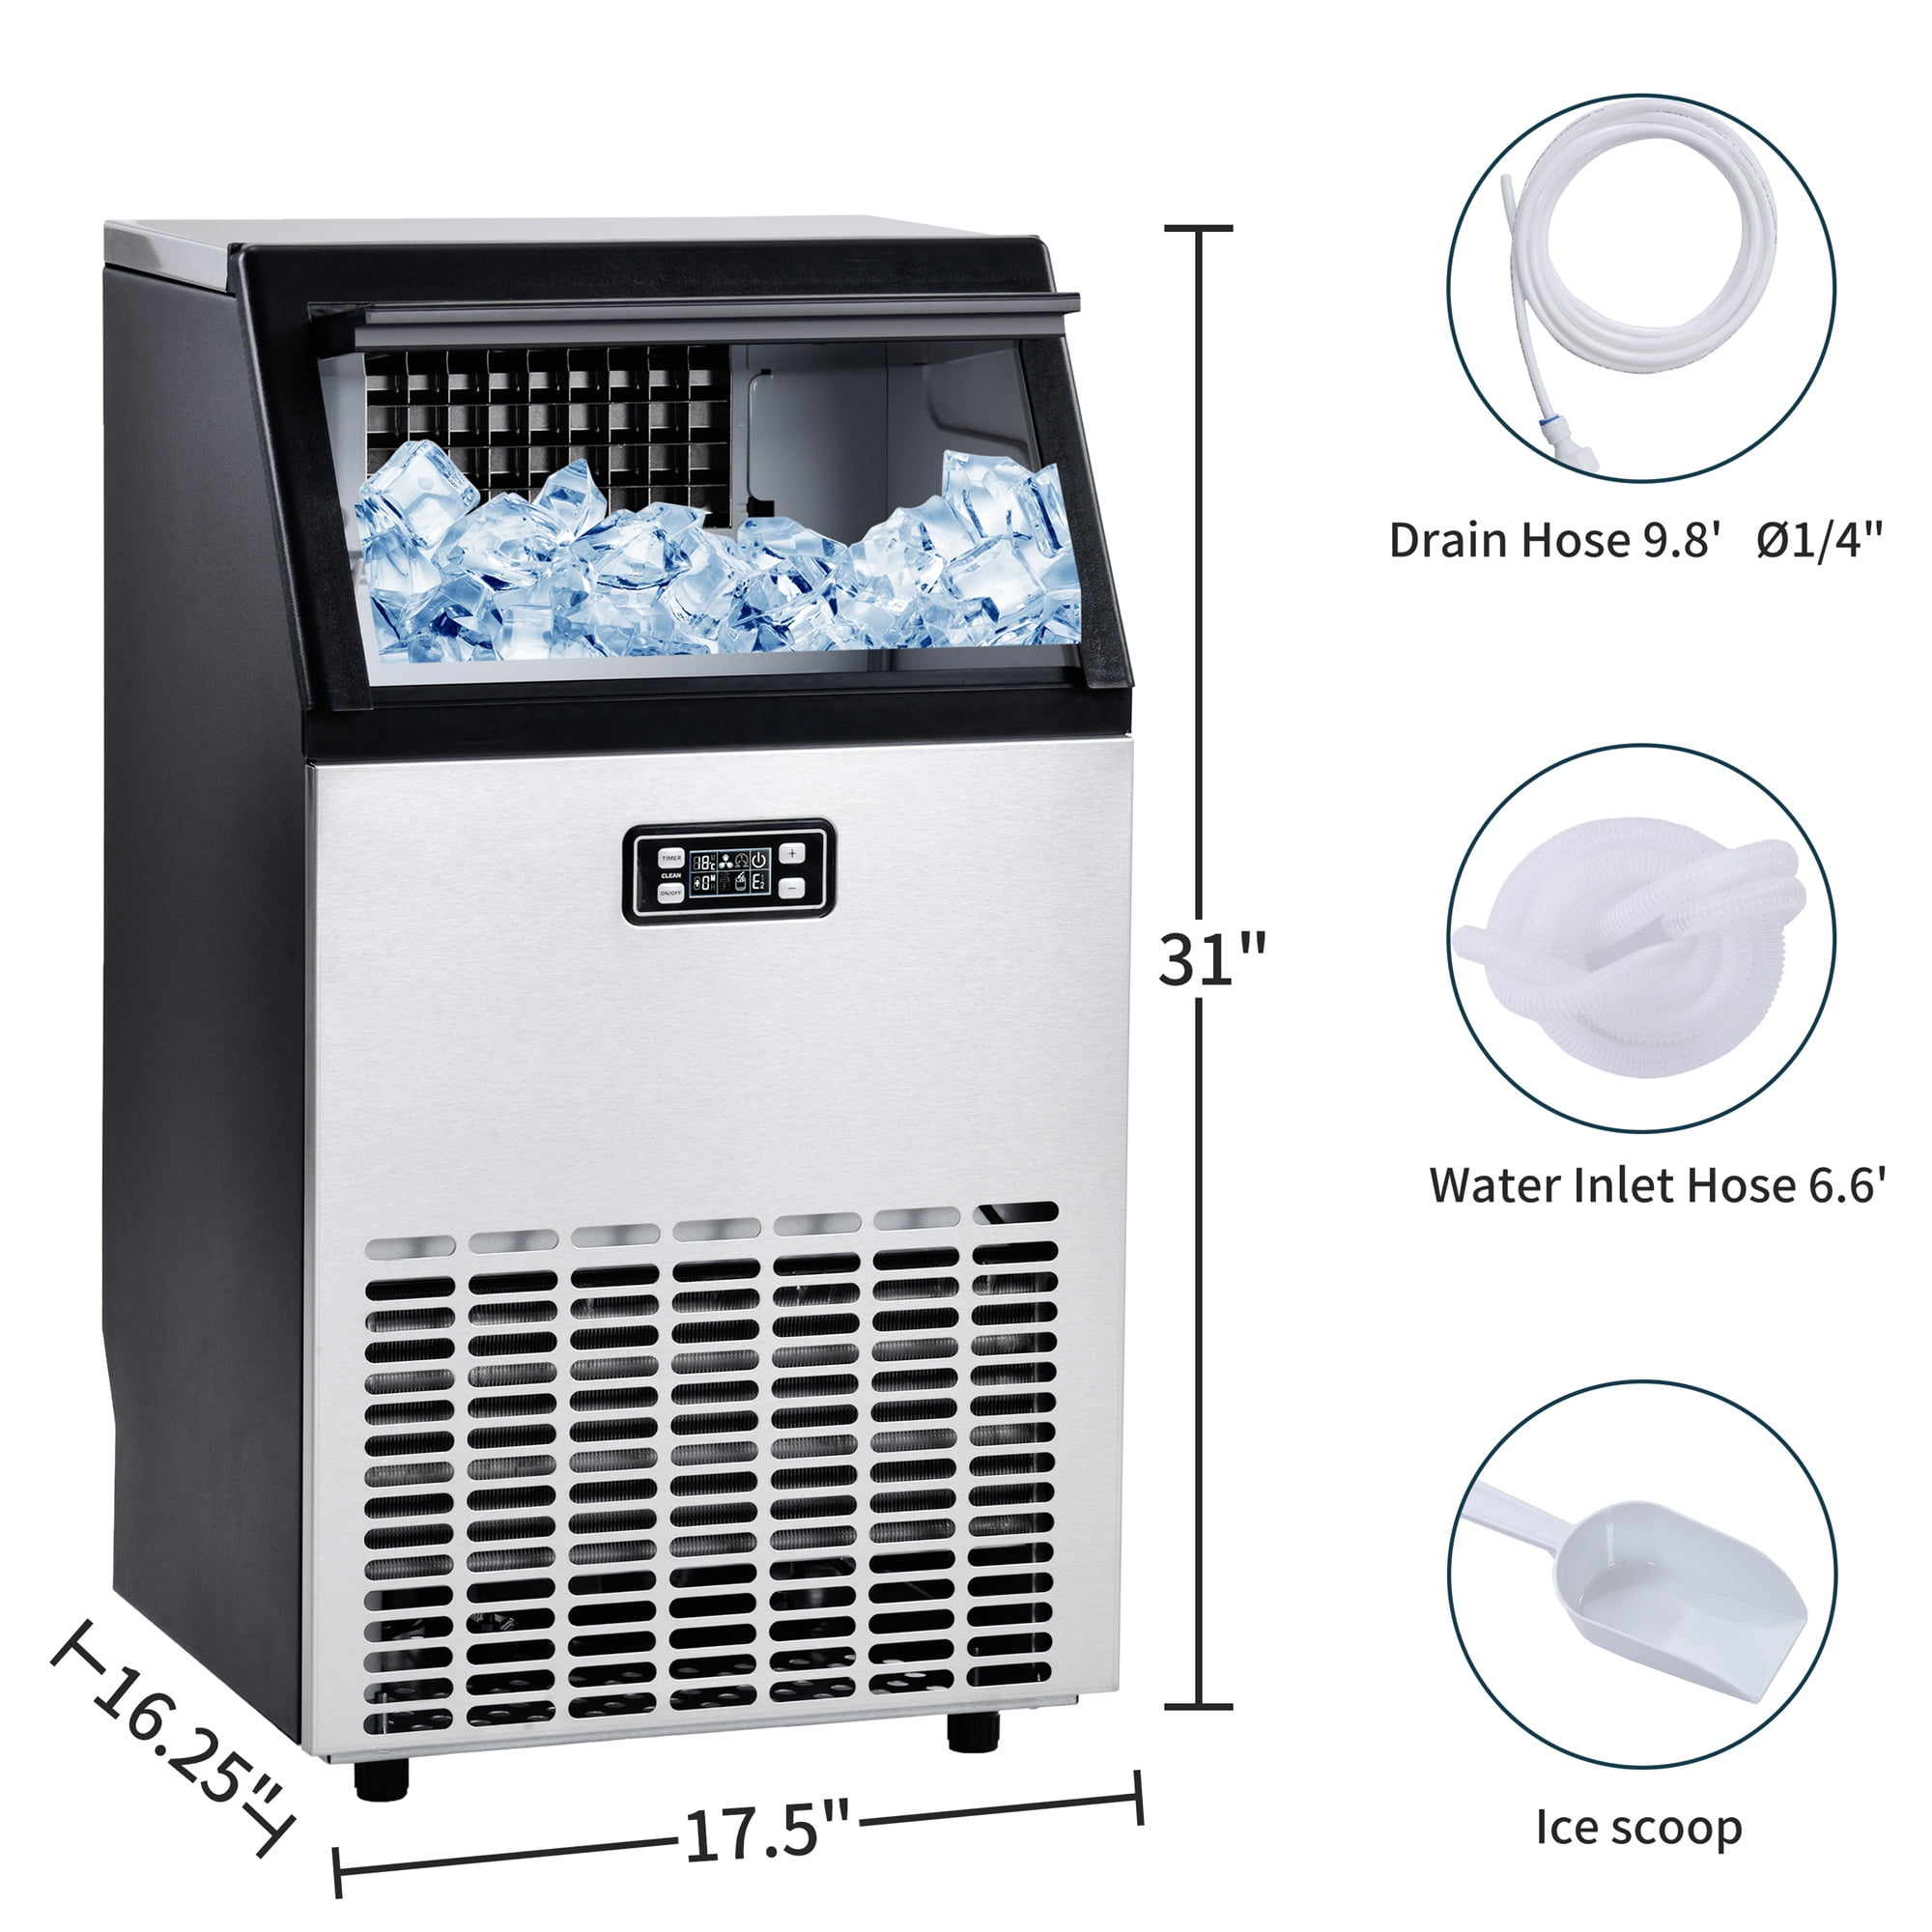 ROVSUN Commercial Ice Maker Automatic Built-In Stainless Steel Under counter / Freestanding / Portable Ice Machine for Restaurant Bar 18Lx16Wx31H 33lbs Storage,100lbs/24h,5 Accessories 115V 